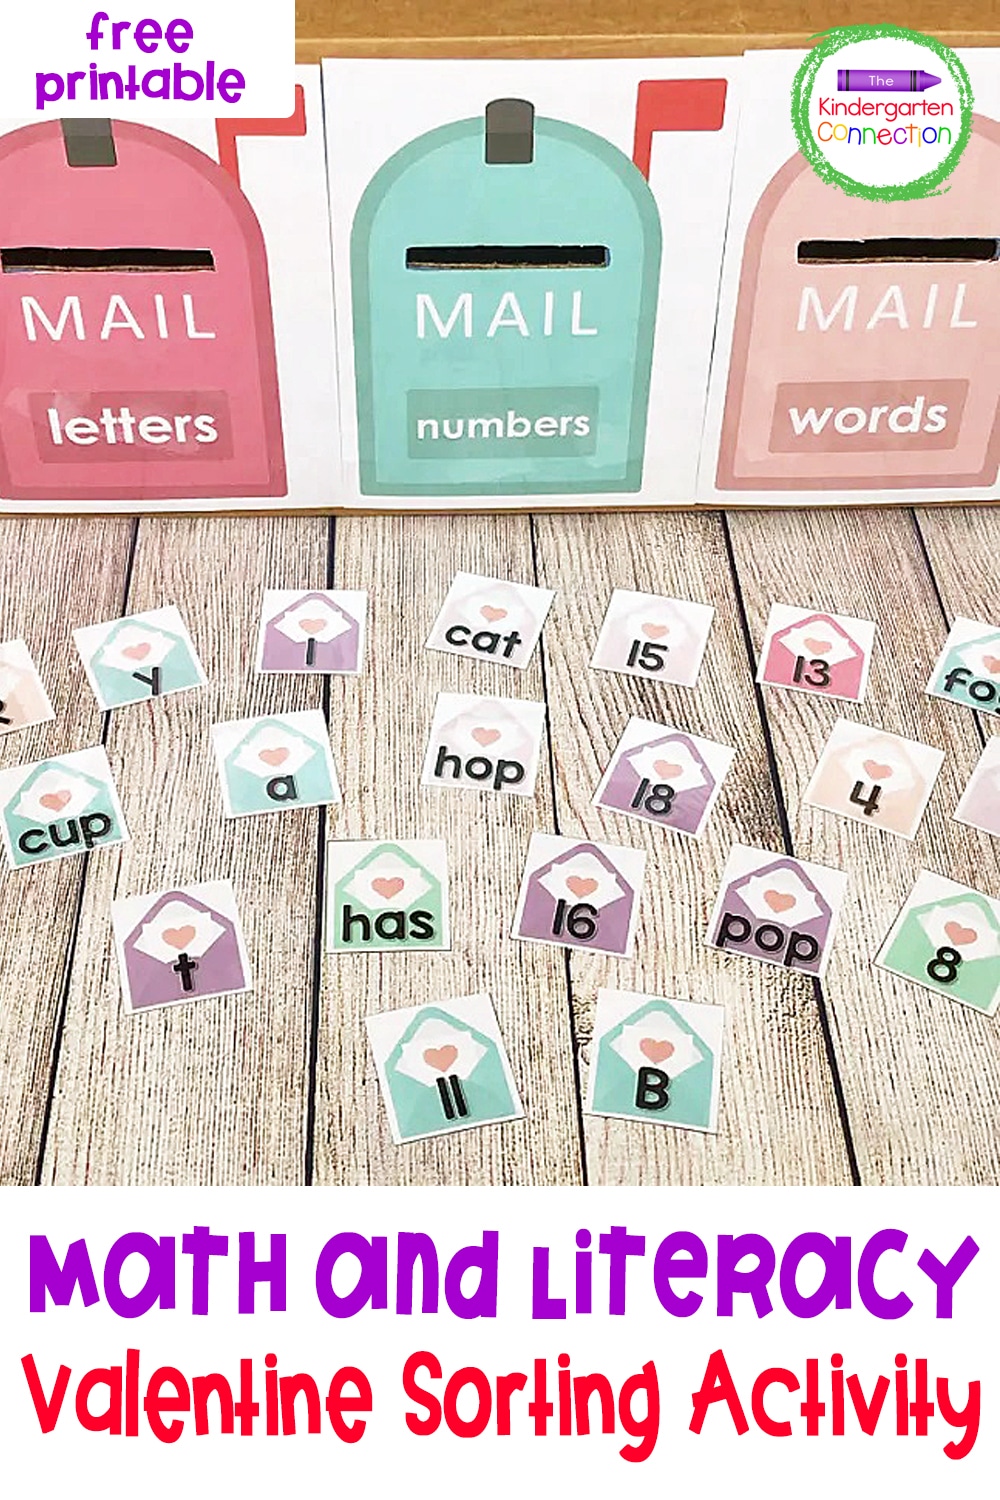 Grab our free Printable Letter, Number, Word Valentine Sorting Activity for your Kindergarten centers and small groups!